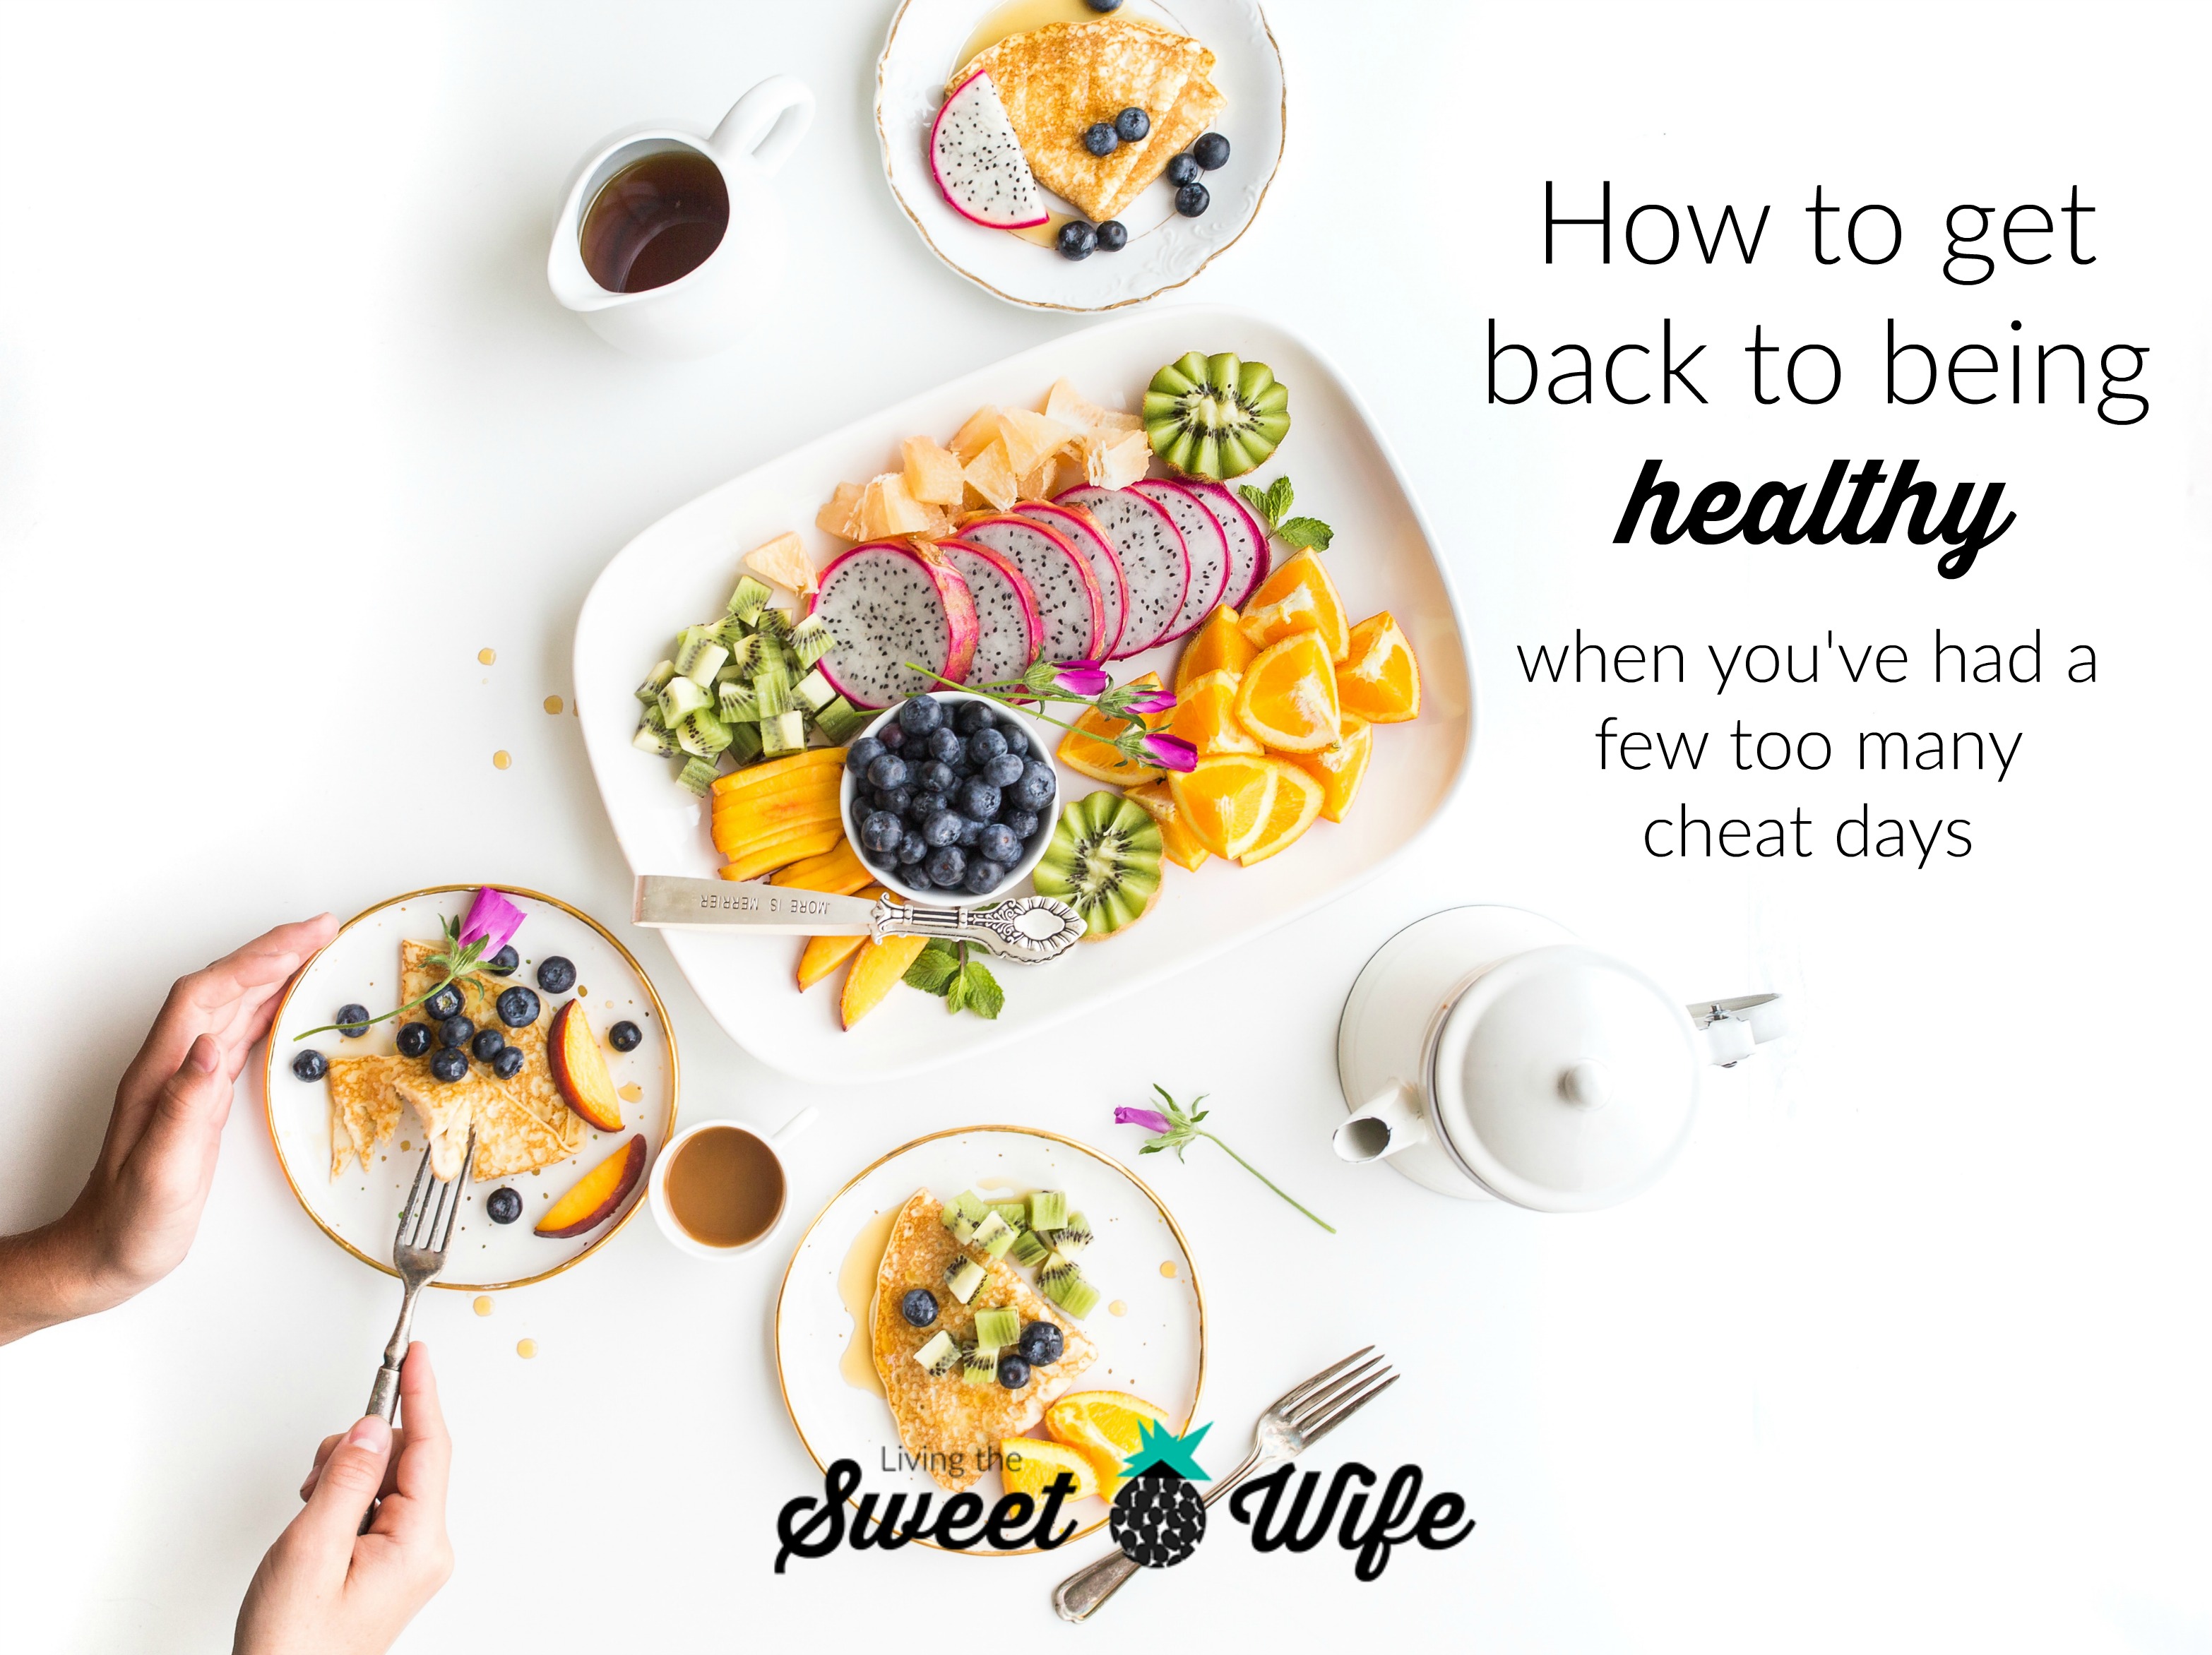 It can be overwhelming when you know you want to “get back on track,” but you feel like you have a long way to go. Today, I’m here to share 6 little ways you can get back to being healthy. They don’t involve anything crazy. Just small lifestyle changes that will leave you feeling better and back on track to a healthier life.